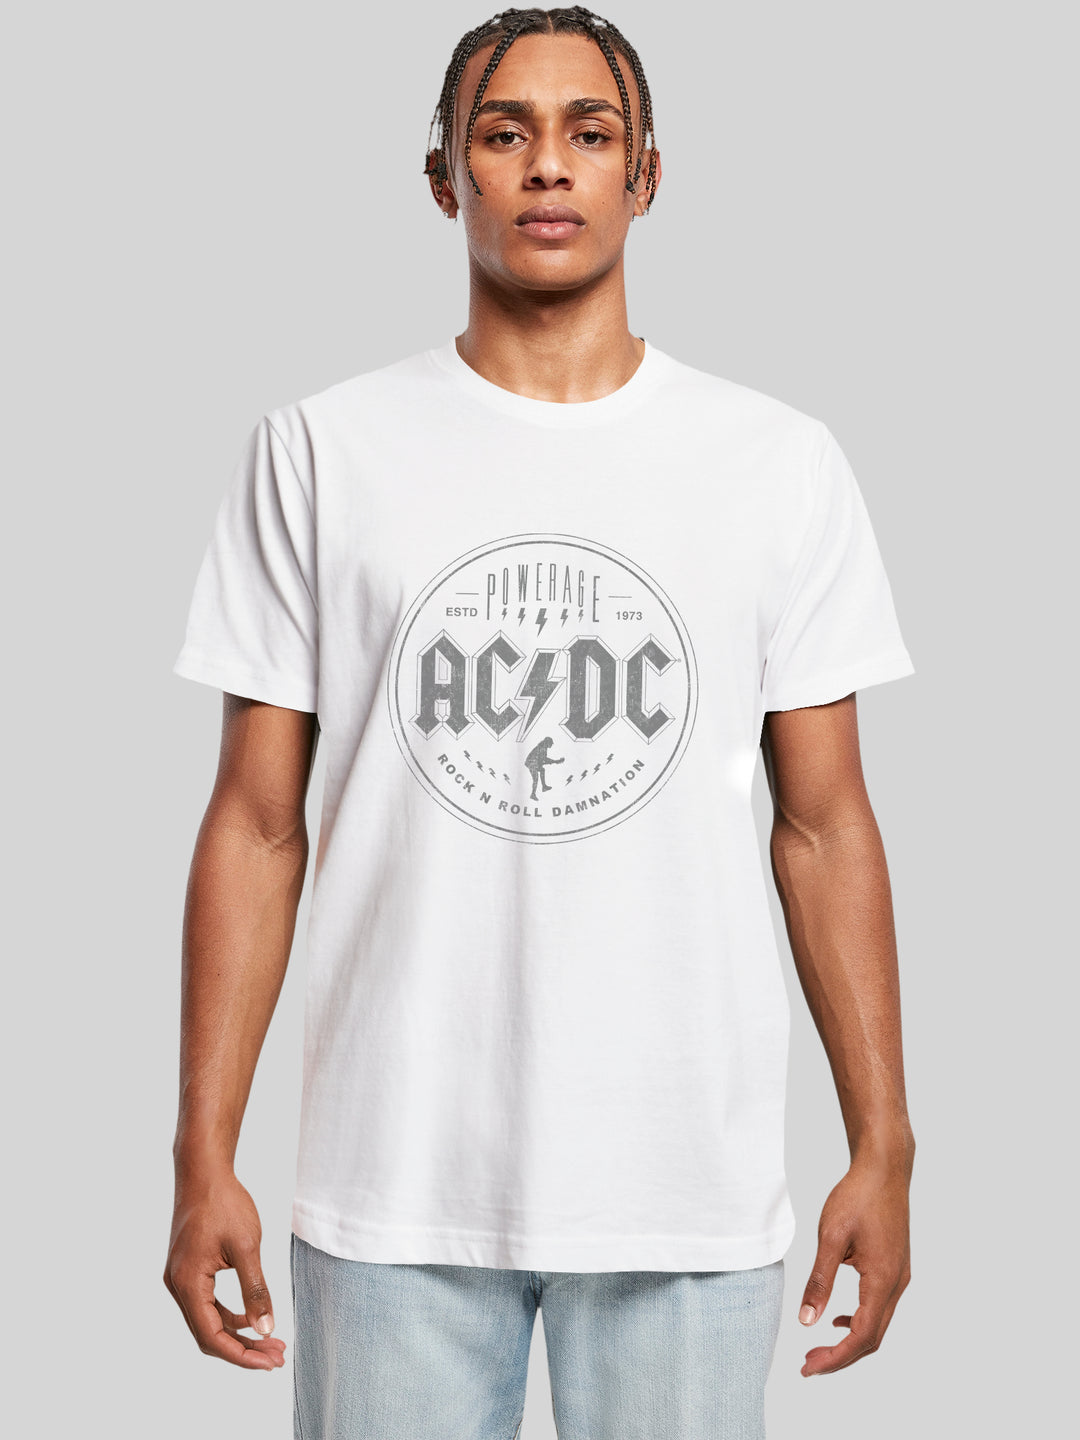 AC/DC Rock N Roll Damnation Round Neck T-Shirt - Unleash Your Inner Rockstar in Style & Comfort